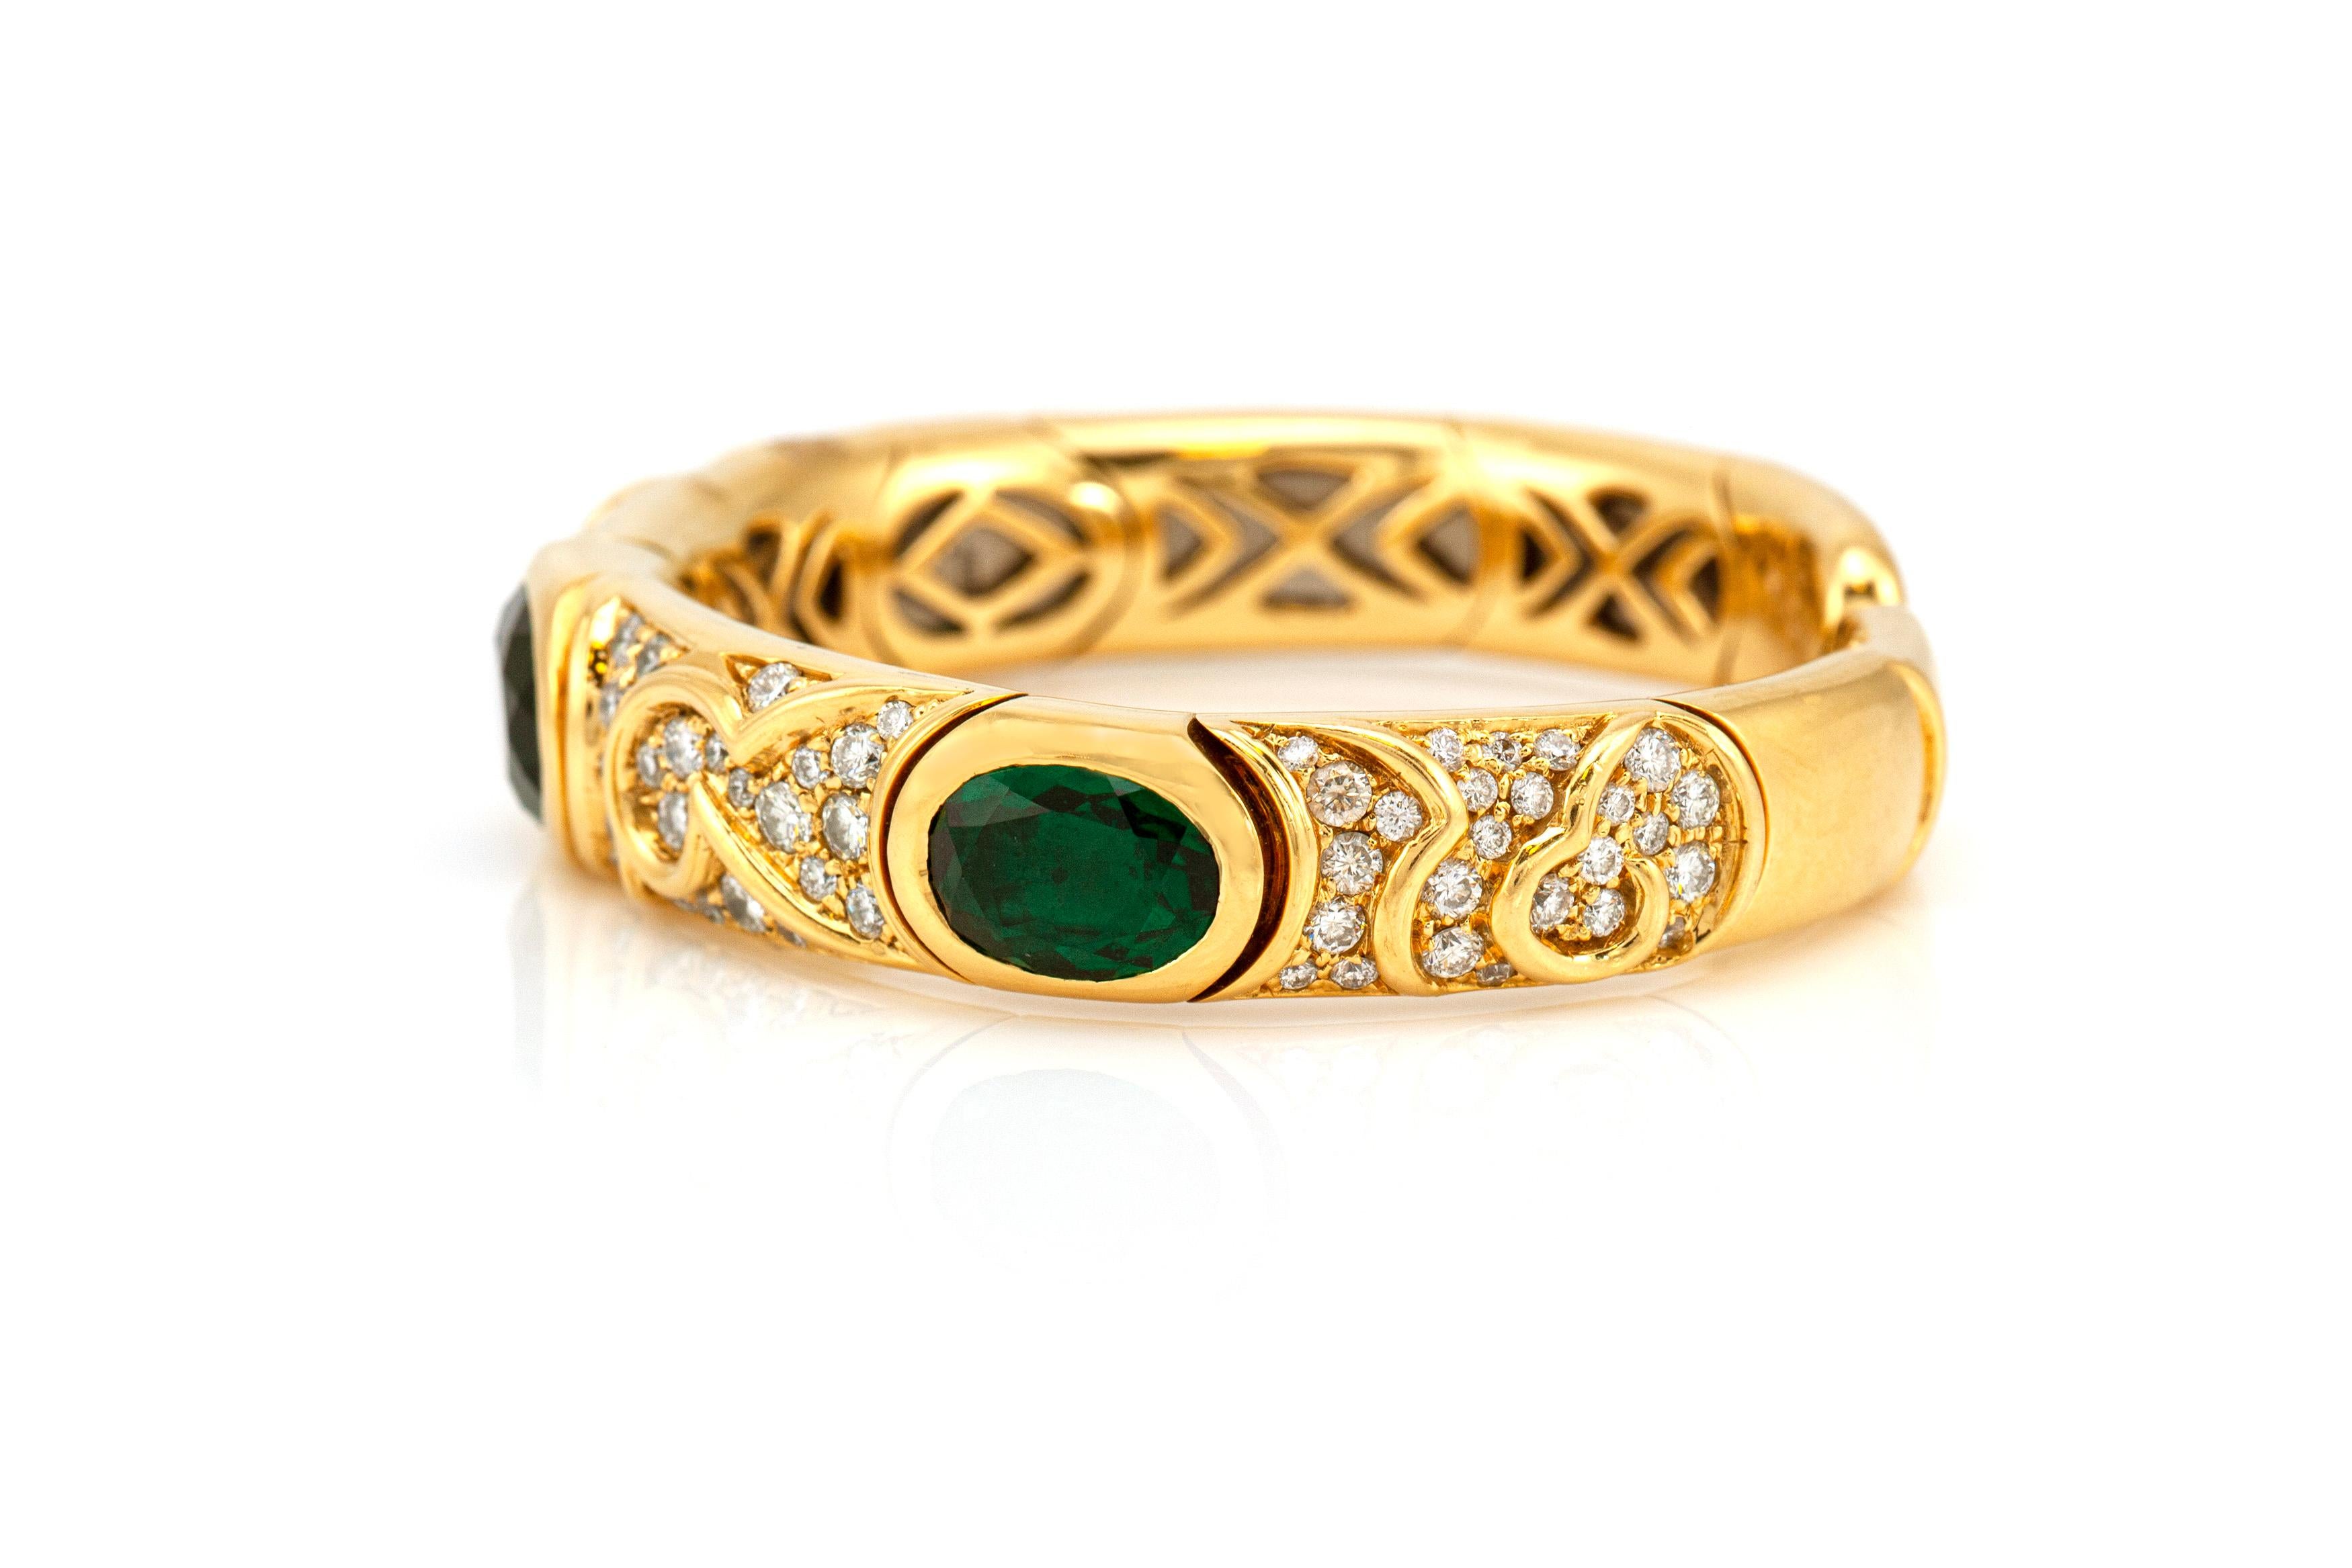 This beautiful Marina B cuff bracelet is finely crafted in 18K yellow gold with green tourmaline and diamonds. 
The diamonds weigh an approximate of 5.00 CT.